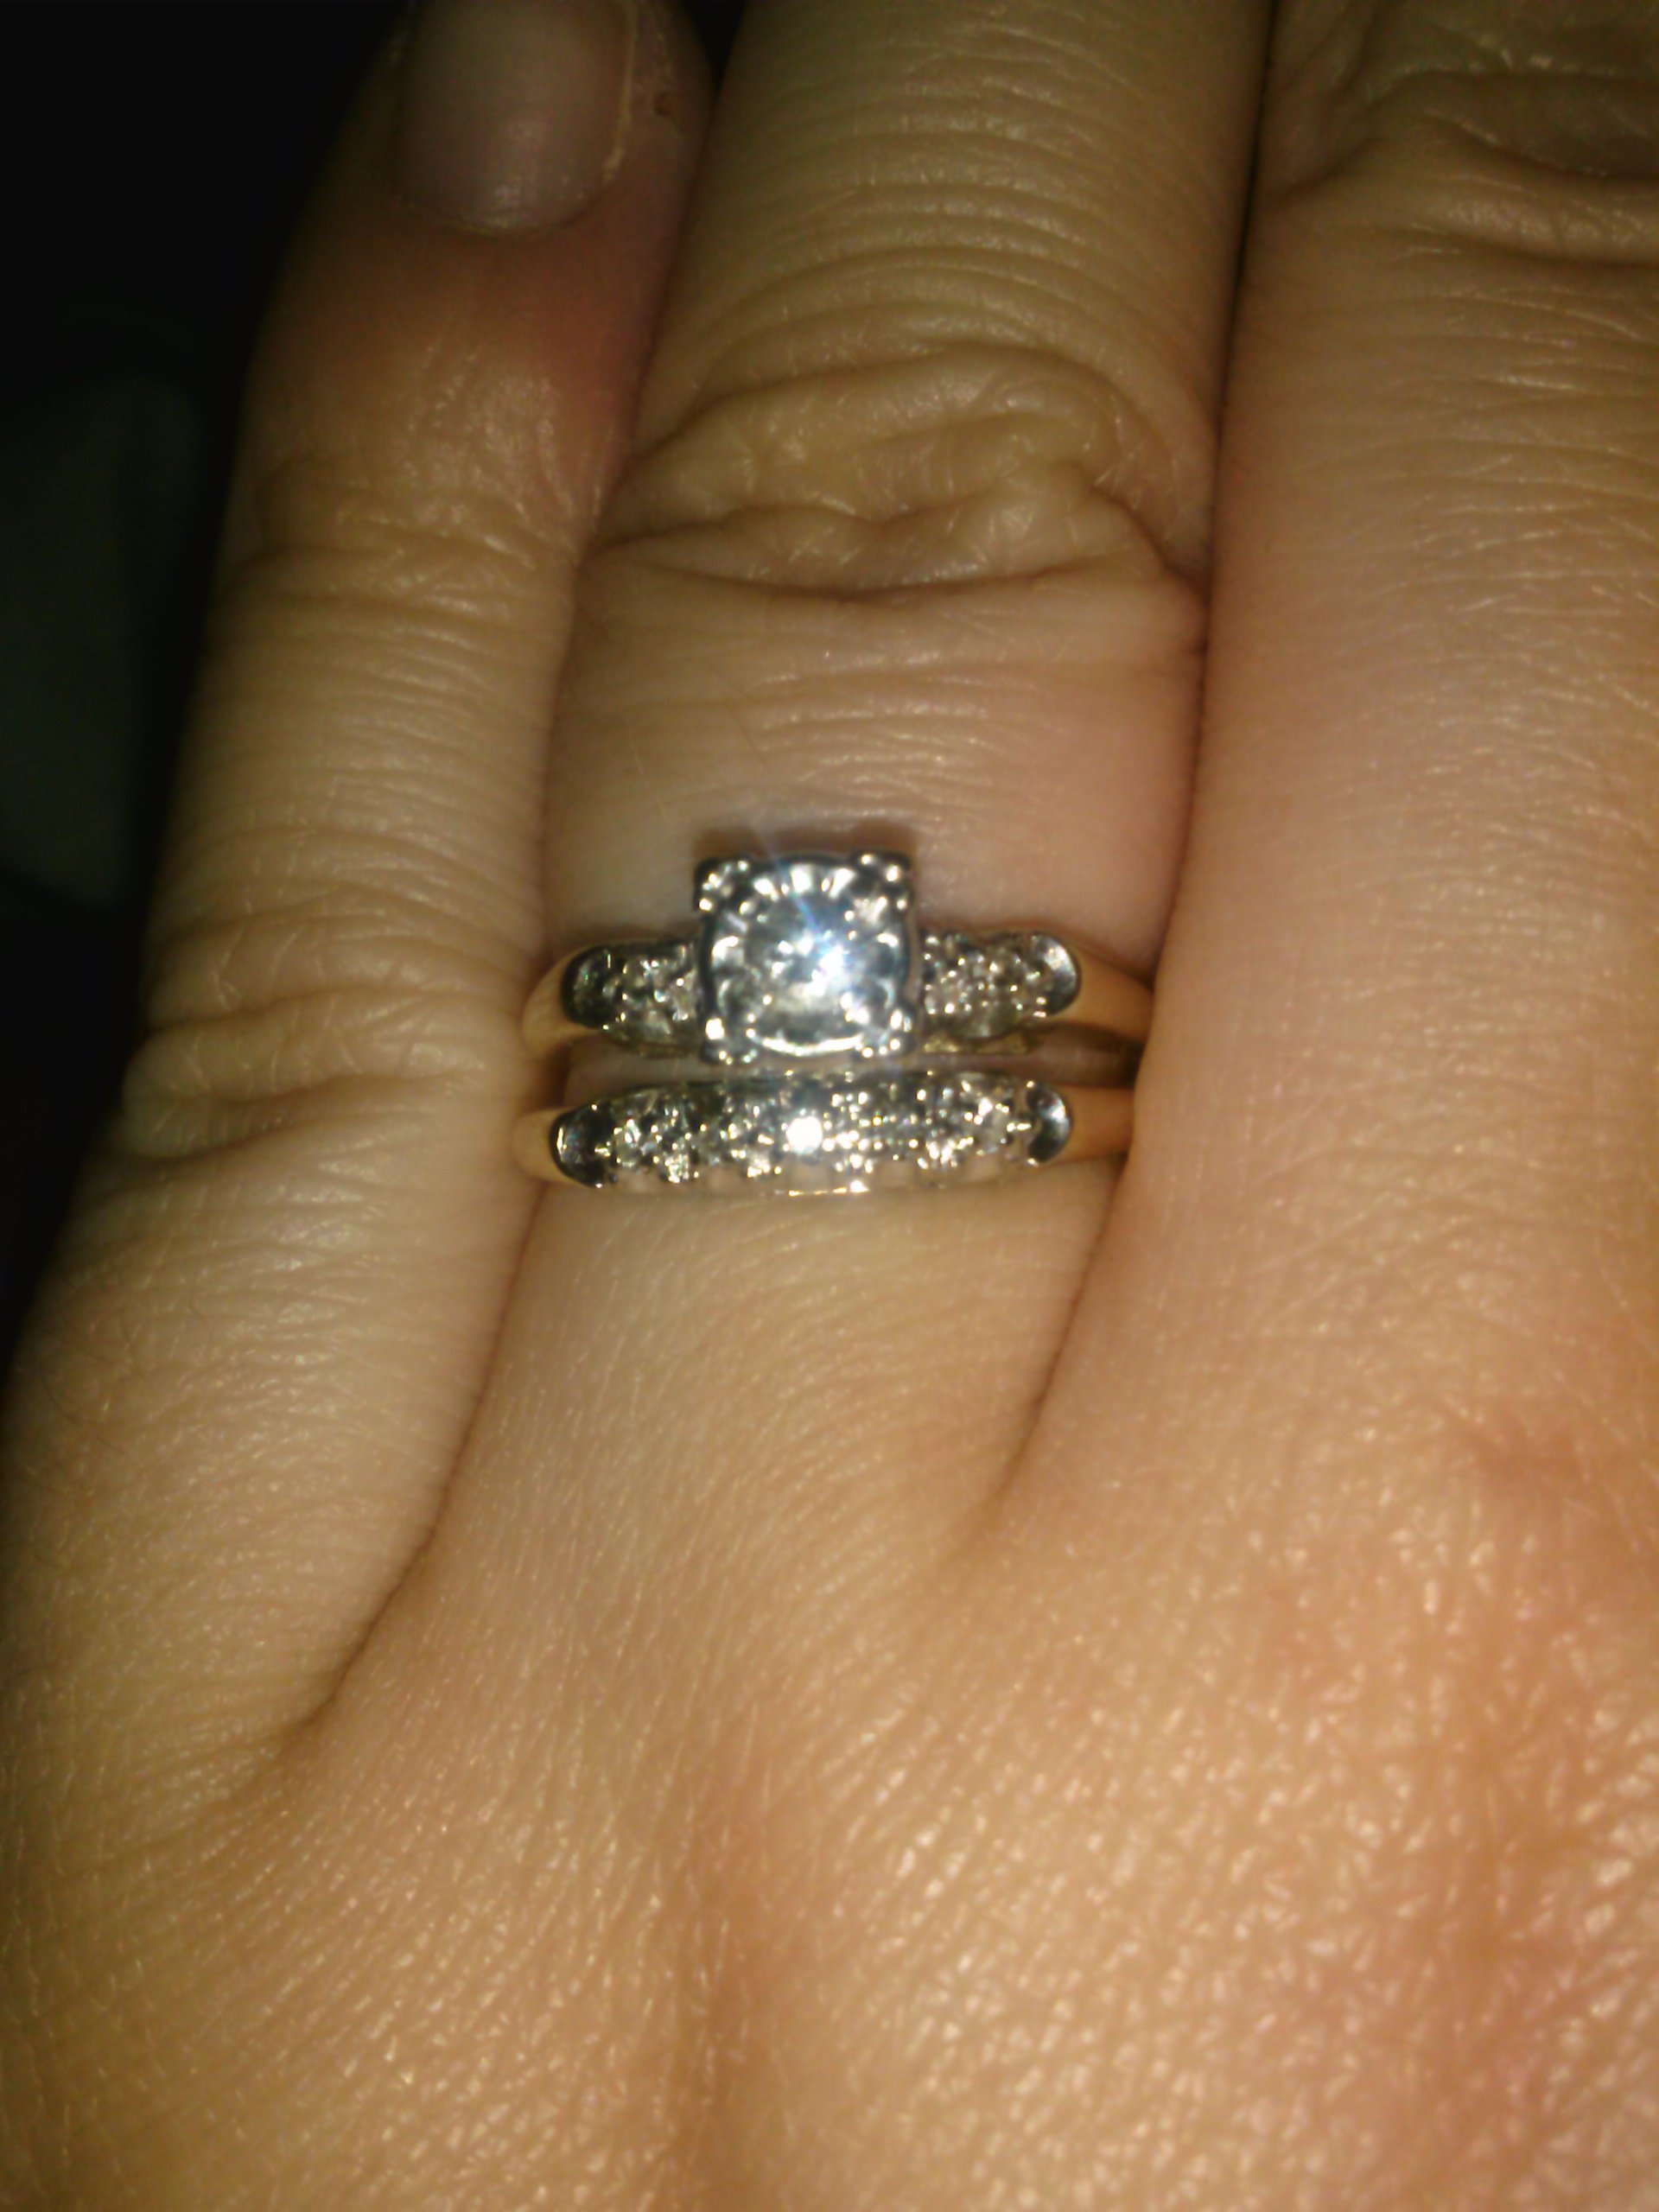 How often do you wear your engagement ring?